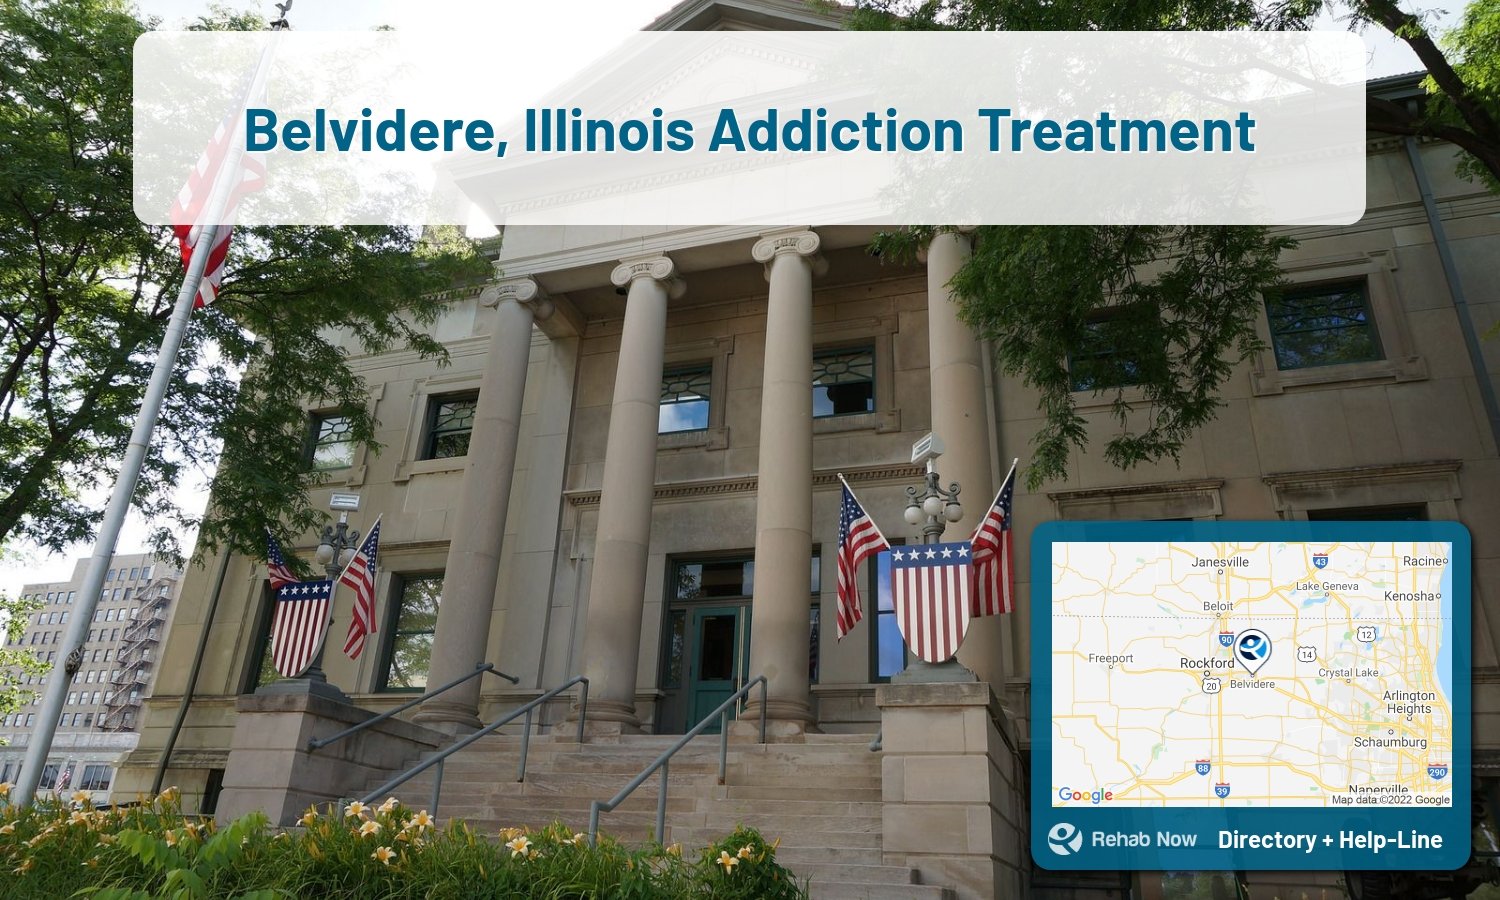 Belvidere, IL Treatment Centers. Find drug rehab in Belvidere, Illinois, or detox and treatment programs. Get the right help now!